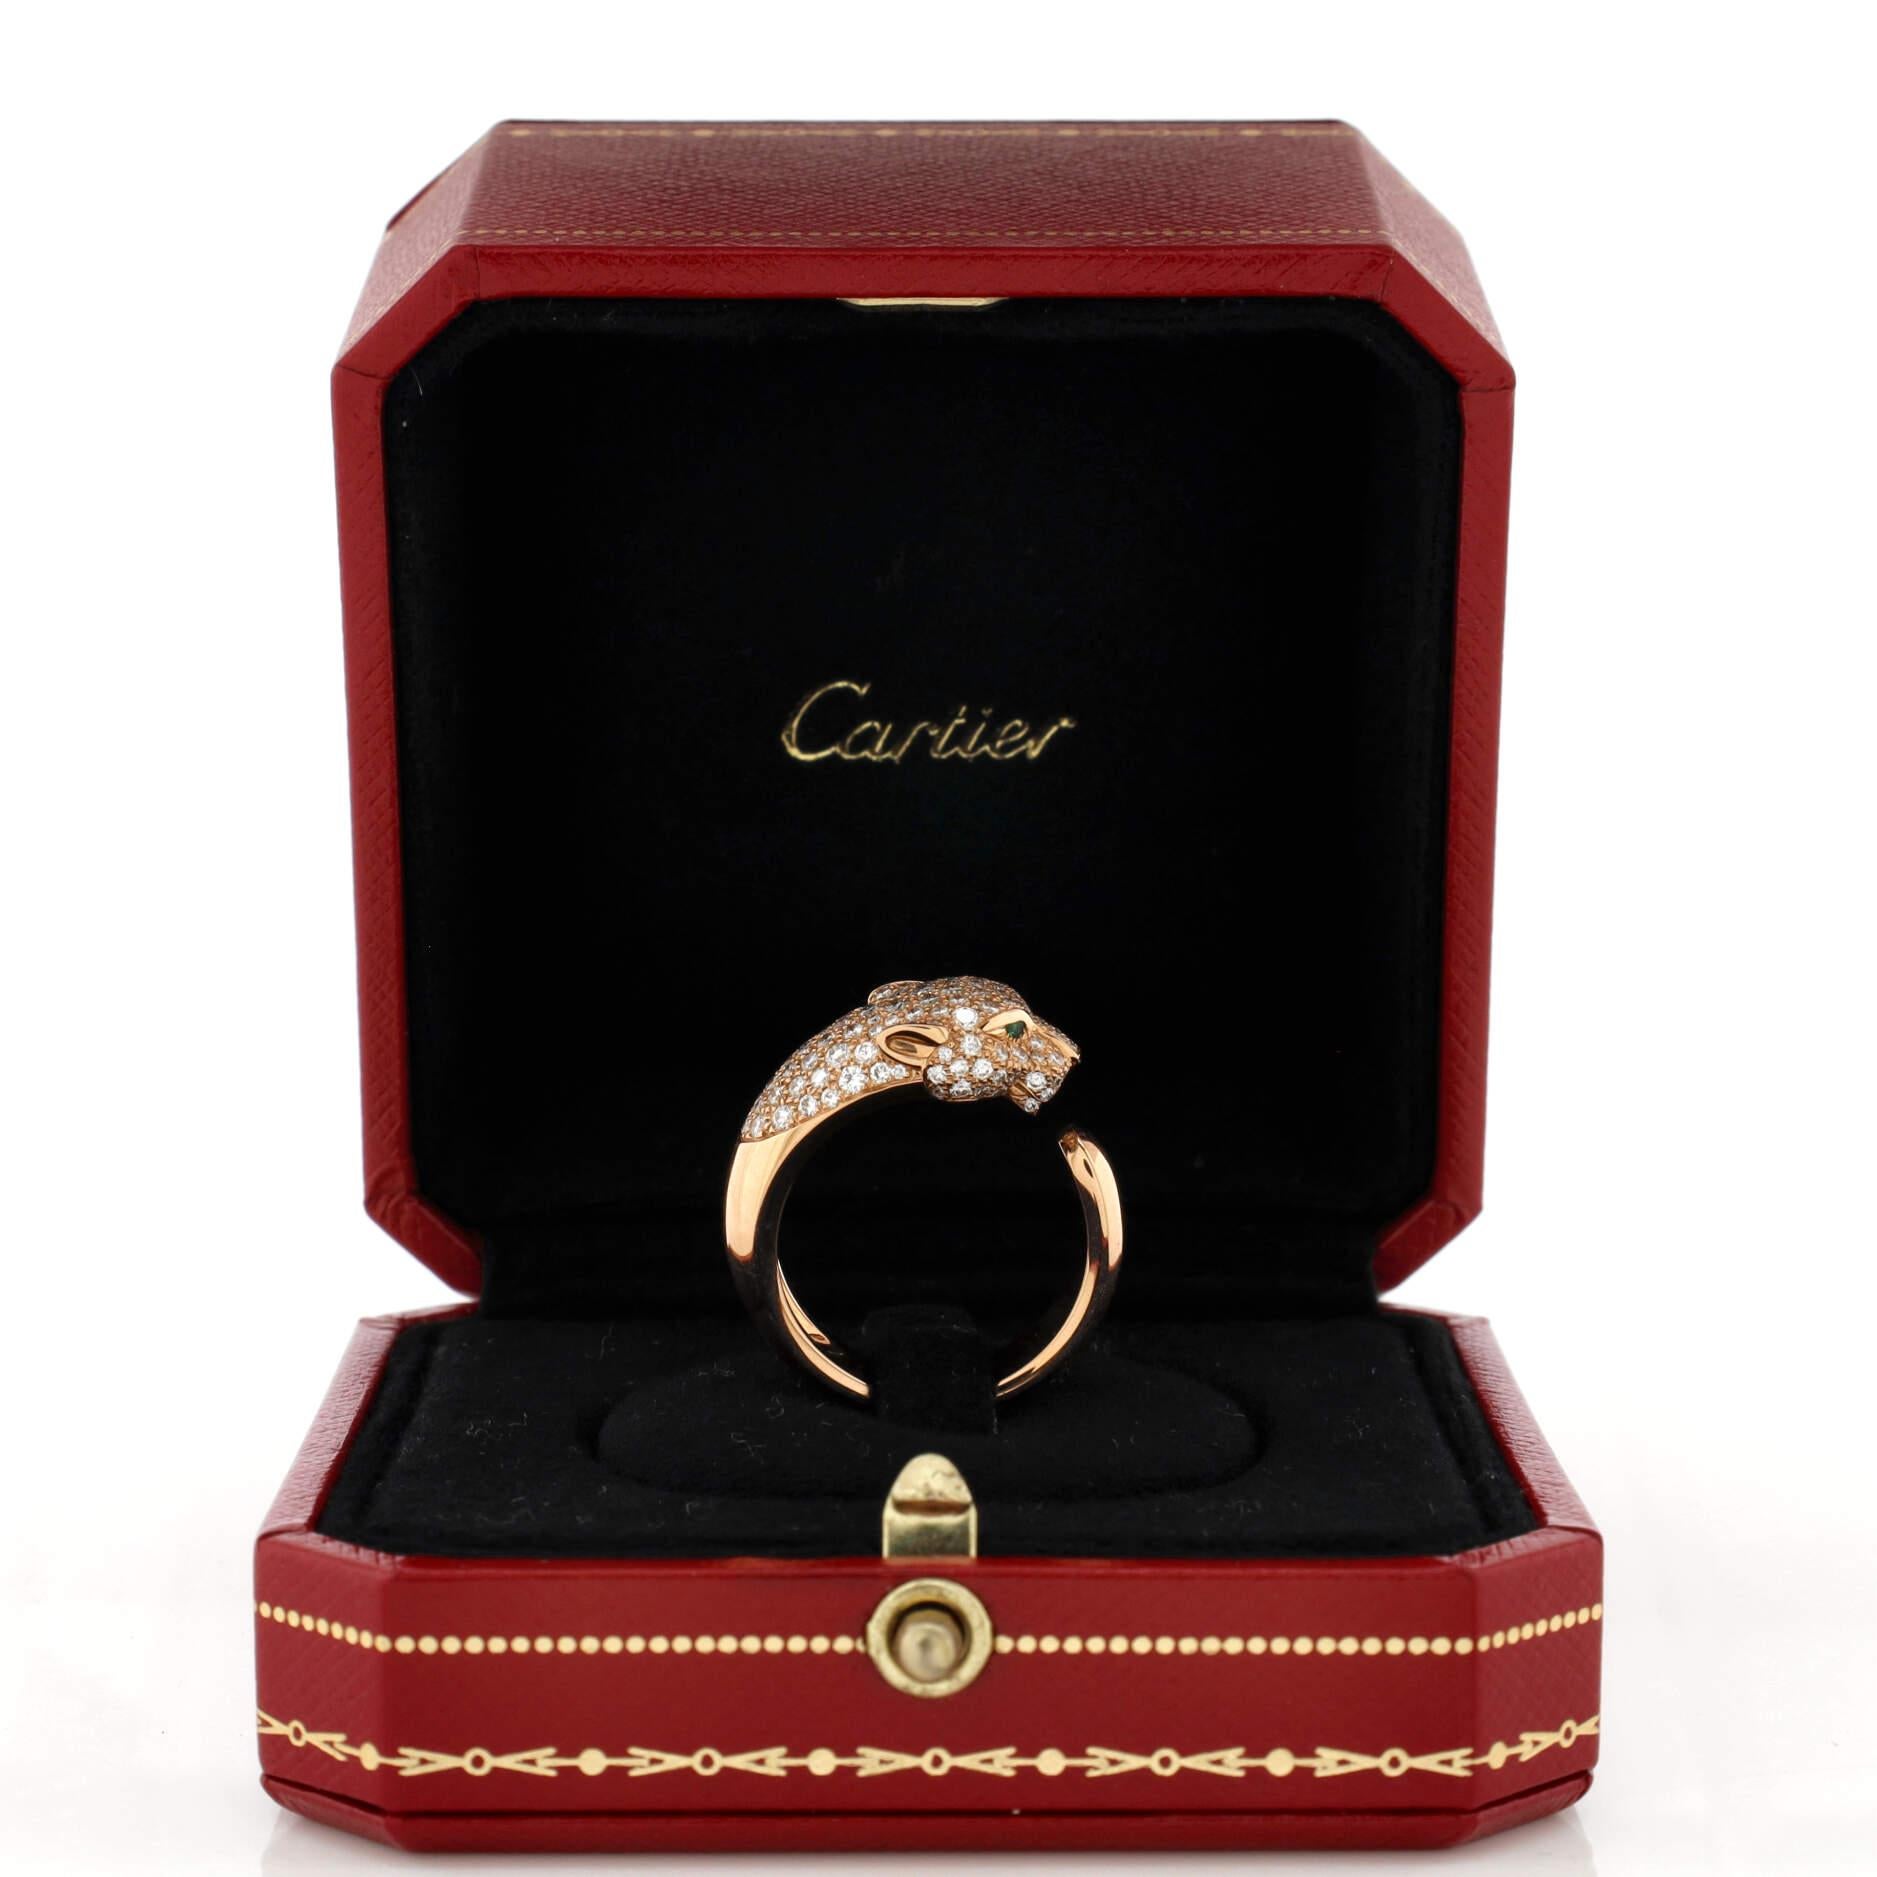 Condition: Great. Minor wear throughout.
Accessories: No Accessories
Measurements: Size: 8.25 - 58, Width: 6.55 mm
Designer: Cartier
Model: Panthere de Cartier Ring 18K Rose Gold and Half Pave Diamonds with Onyx and Emeralds
Exterior Color: Rose